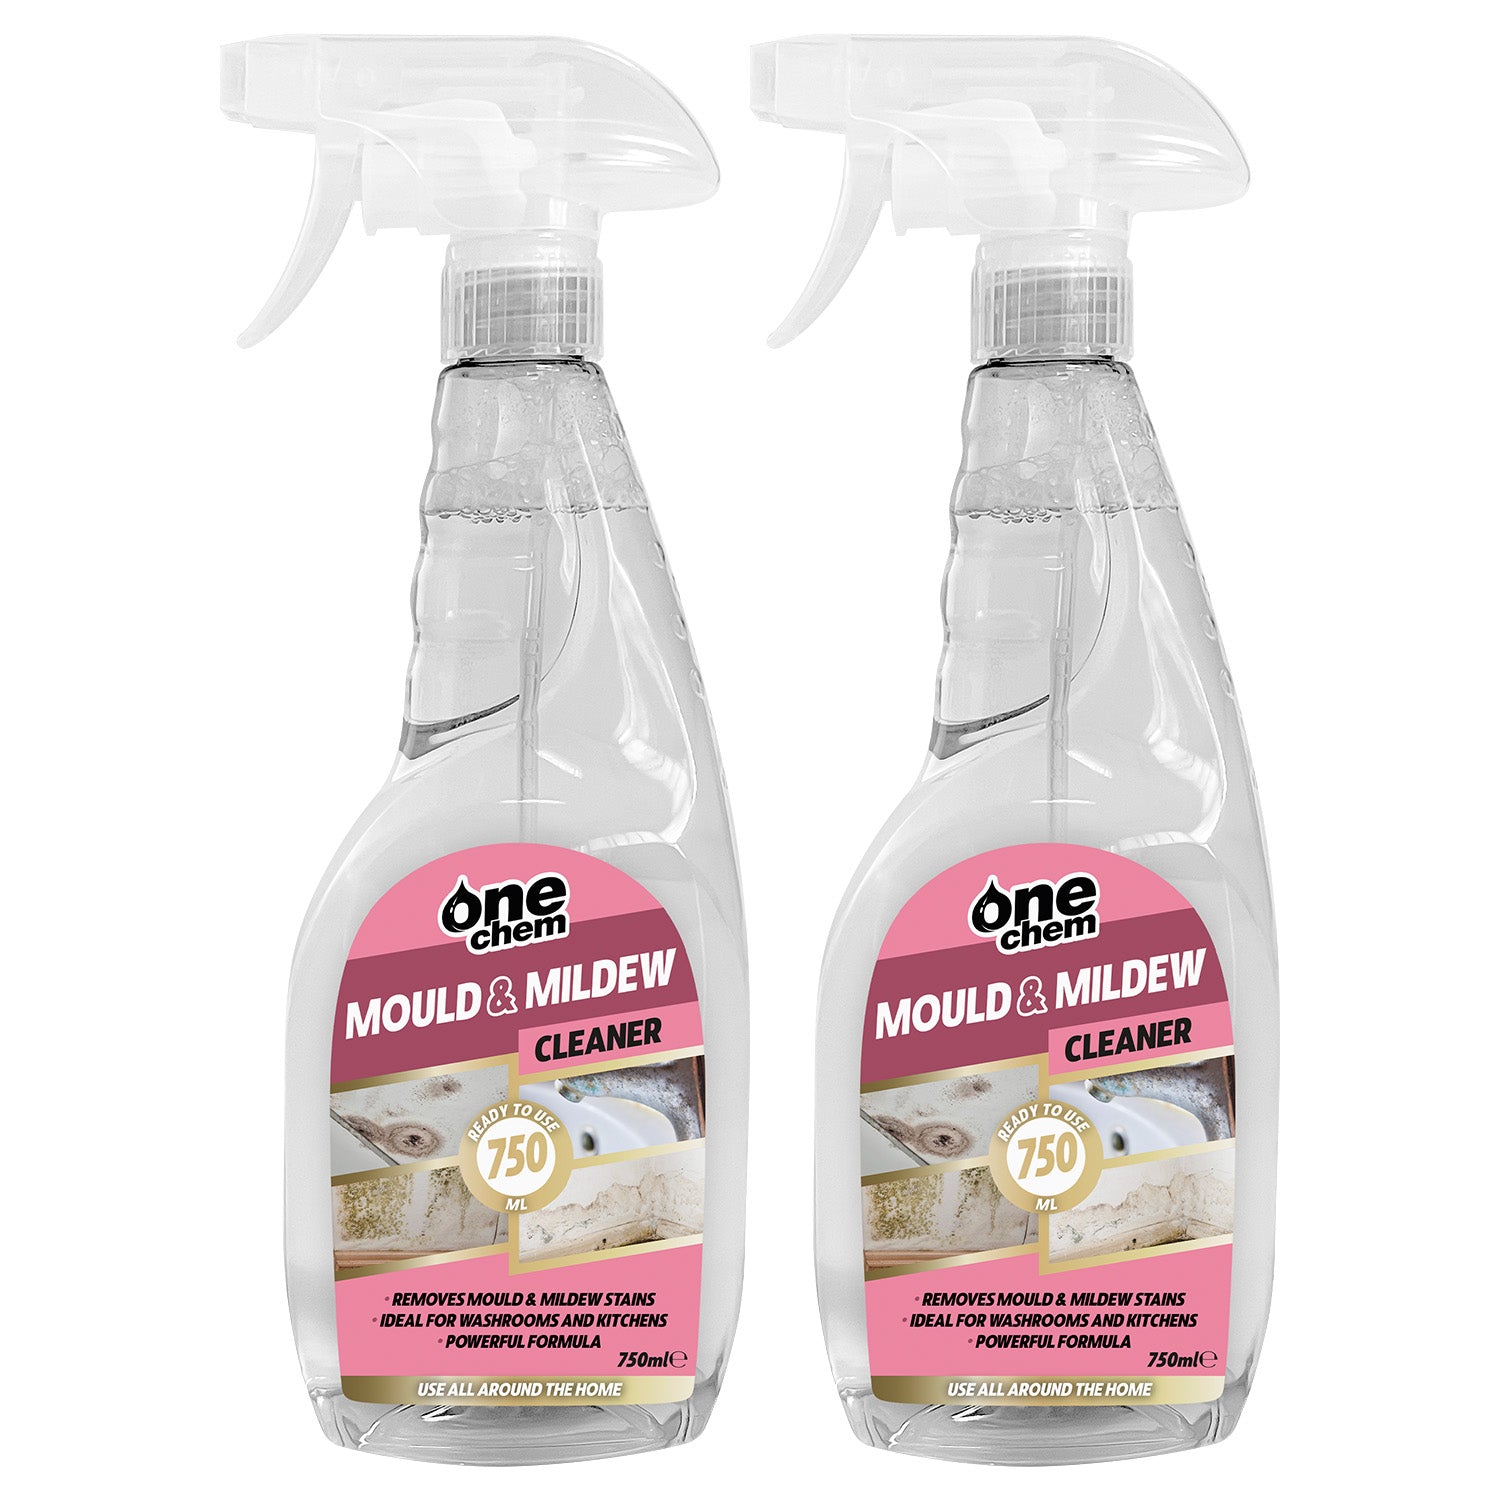 One Chem - Mould and Mildew Cleaner 2 x 750 ml